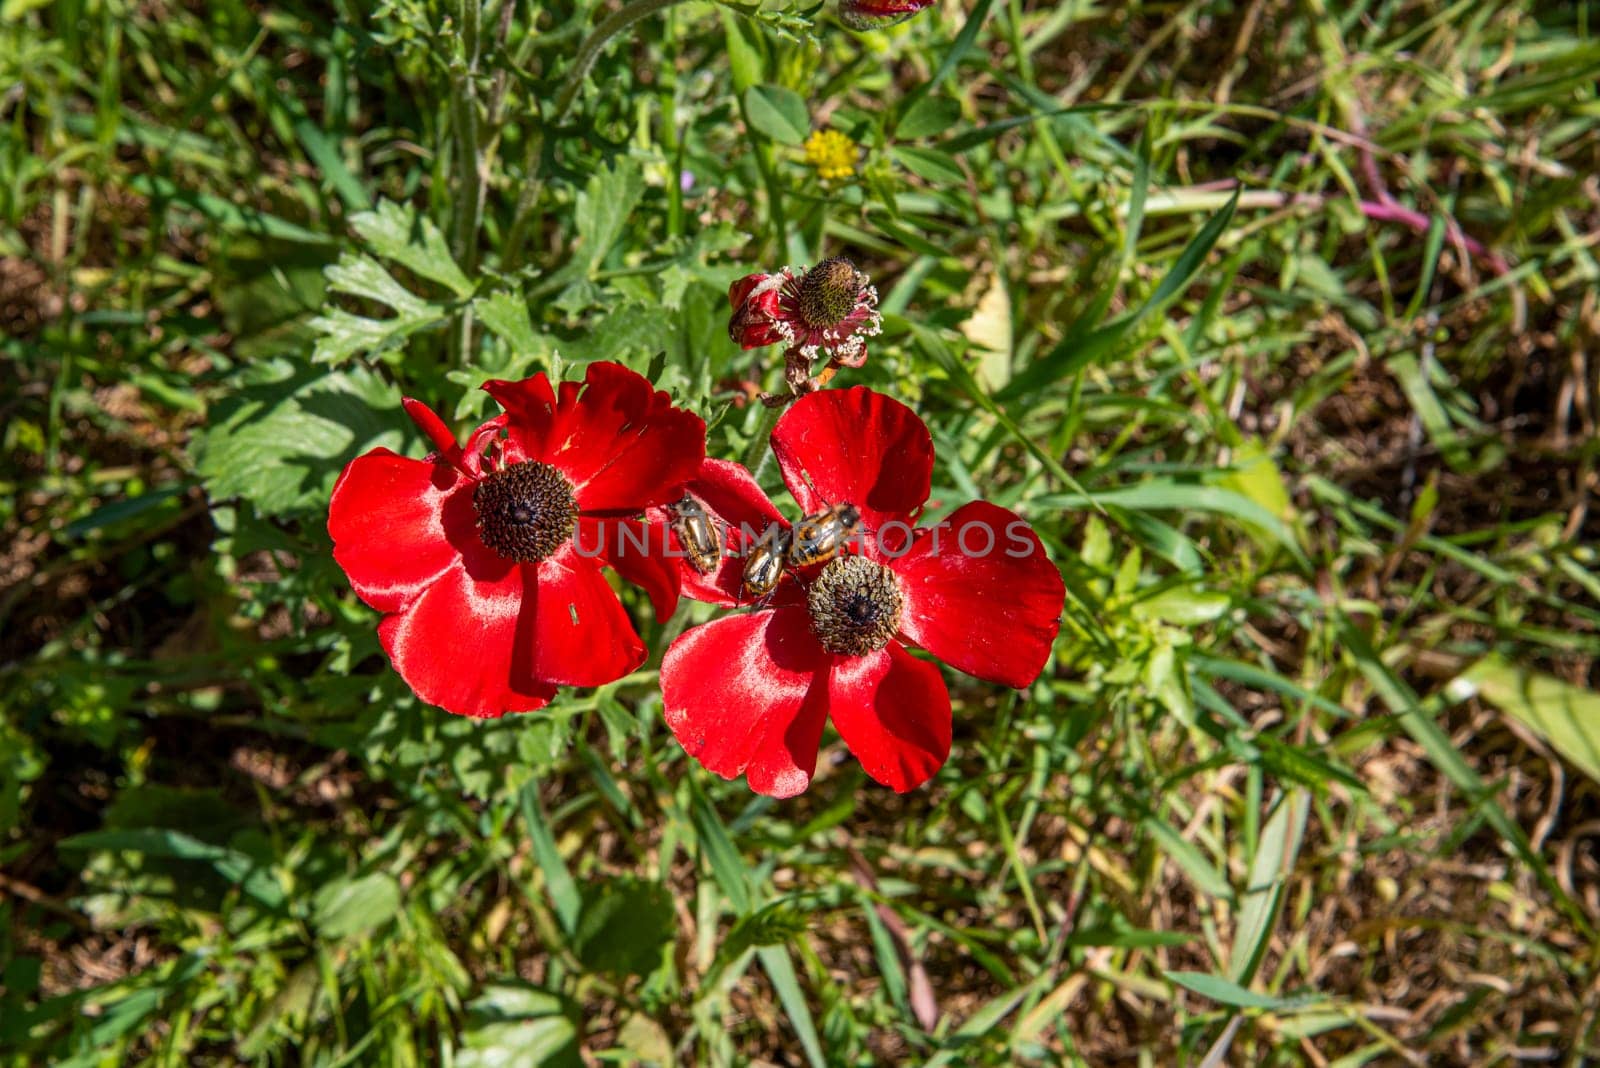 Red poppies, cornflowers and wheat spikes. Fragile nature, environment biodiversity concepts. Rural background. High quality photo